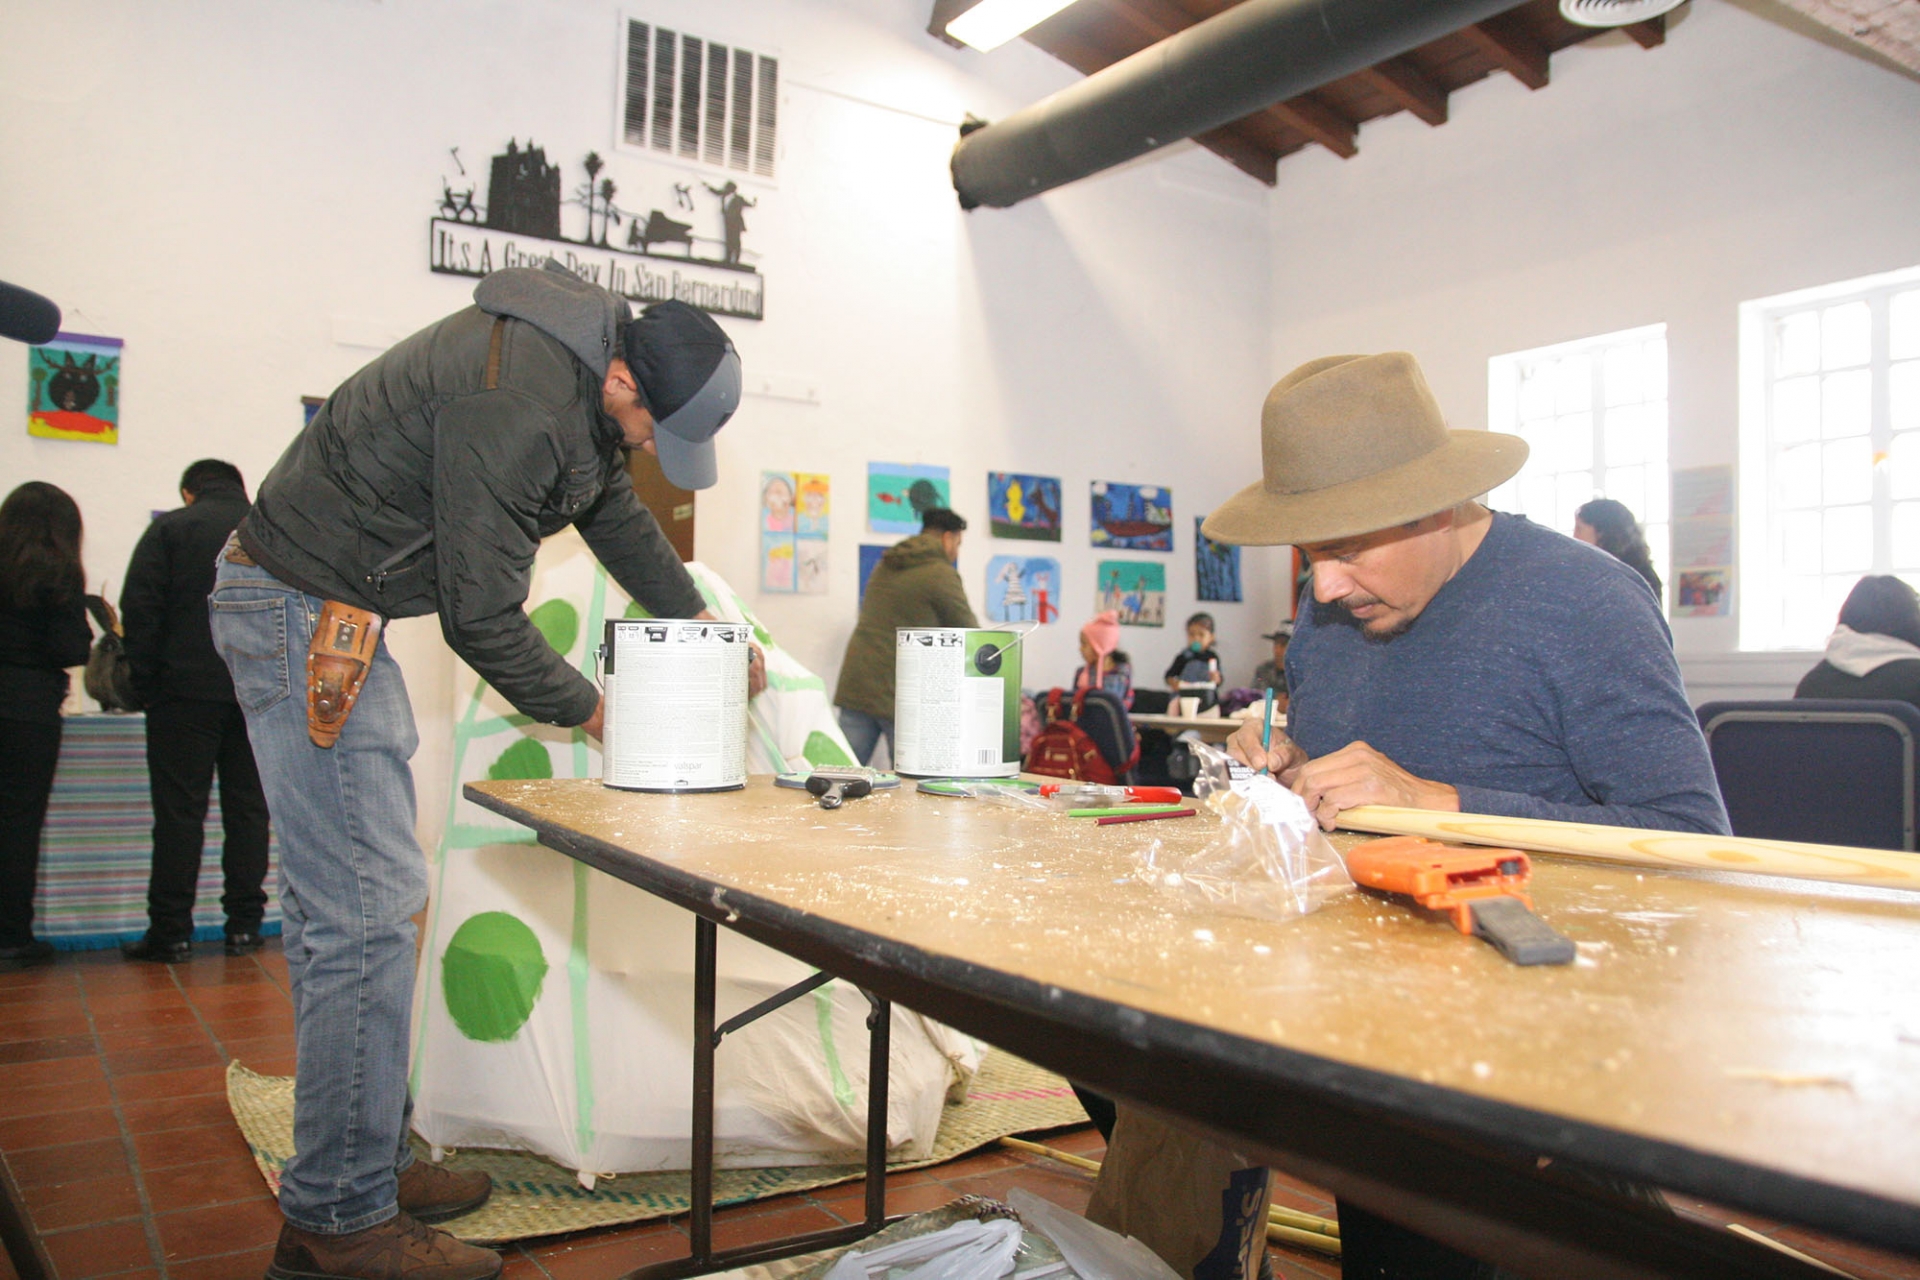 Esteban Zúñiga (at right), a Los Angeles-based artist, constructs a turtle costume.